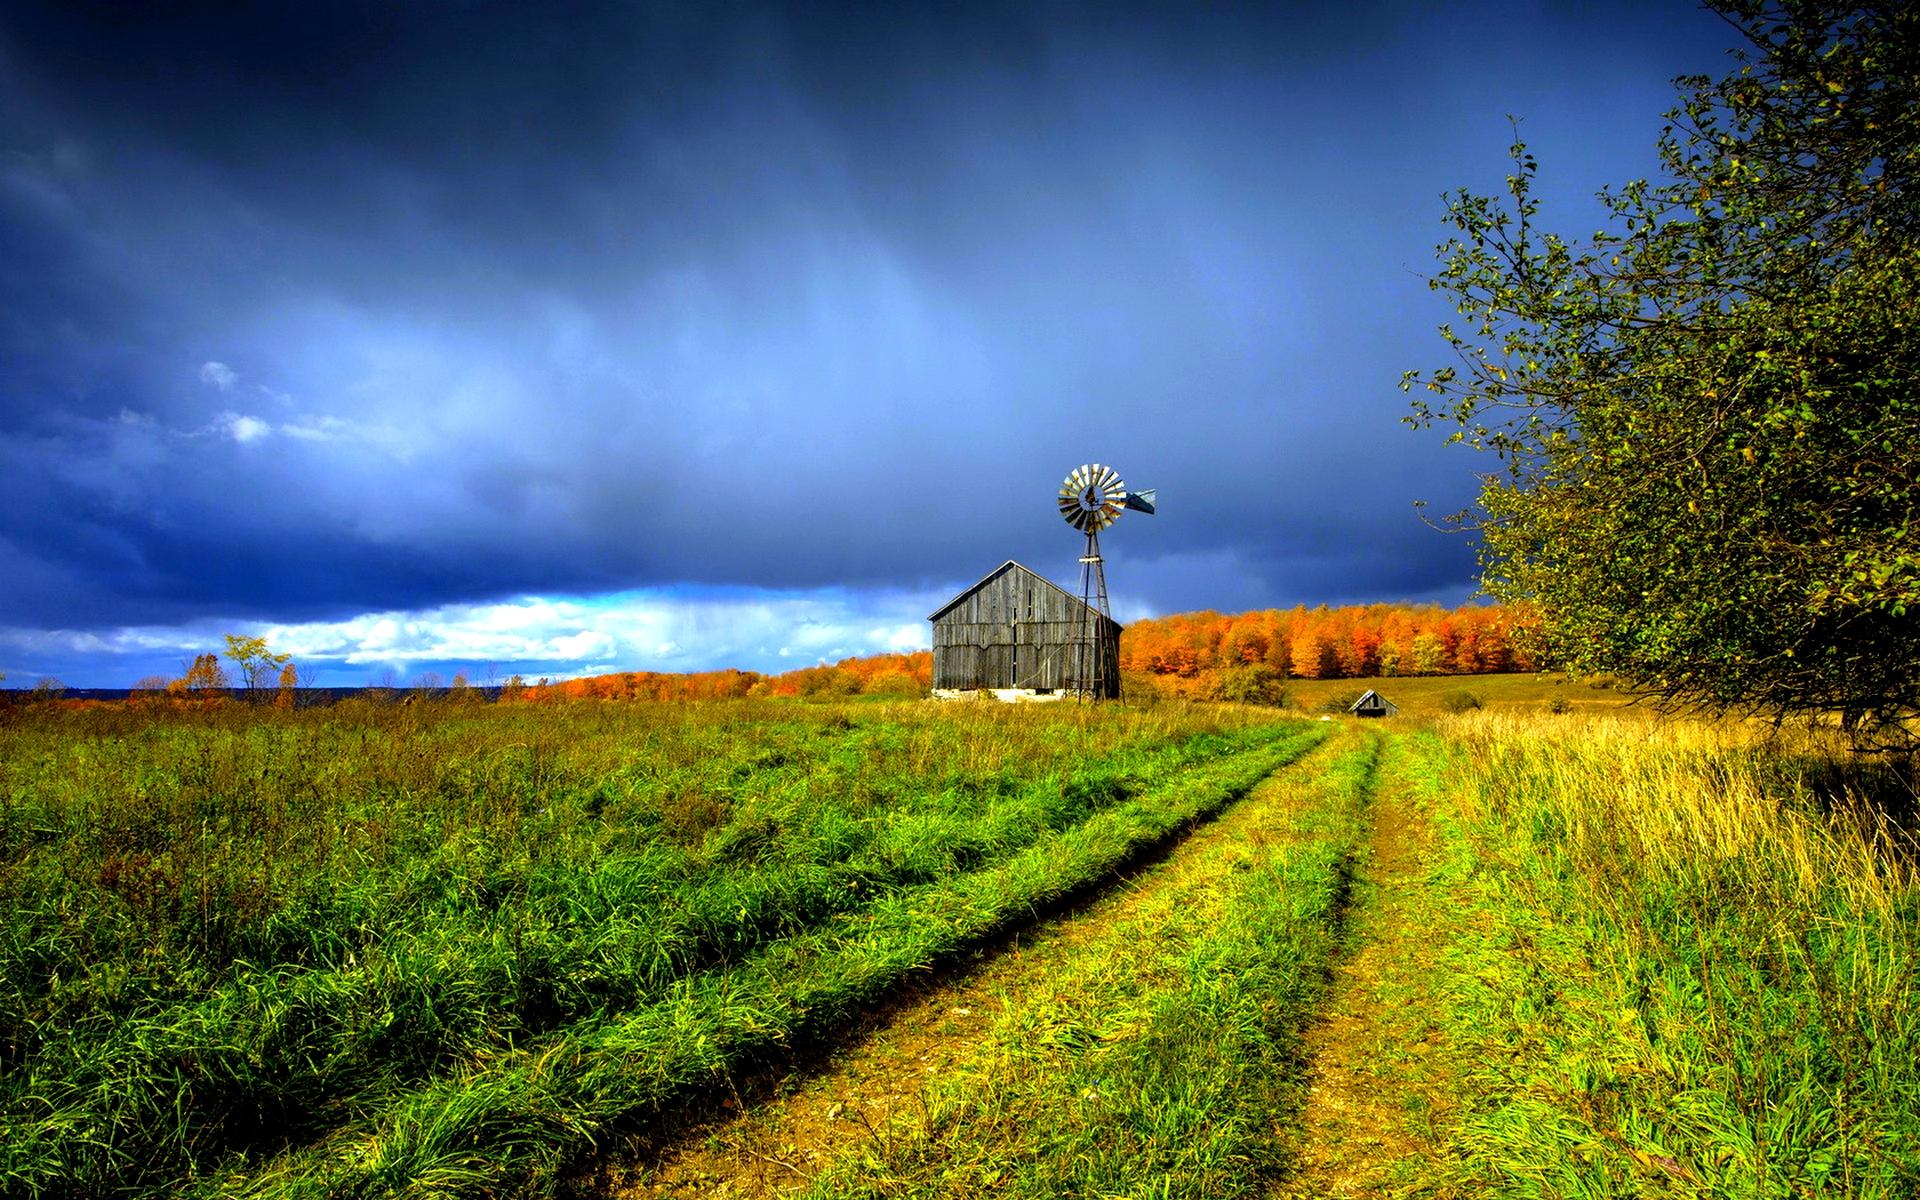 A country road with a barn and windmill in the distance. - Farm